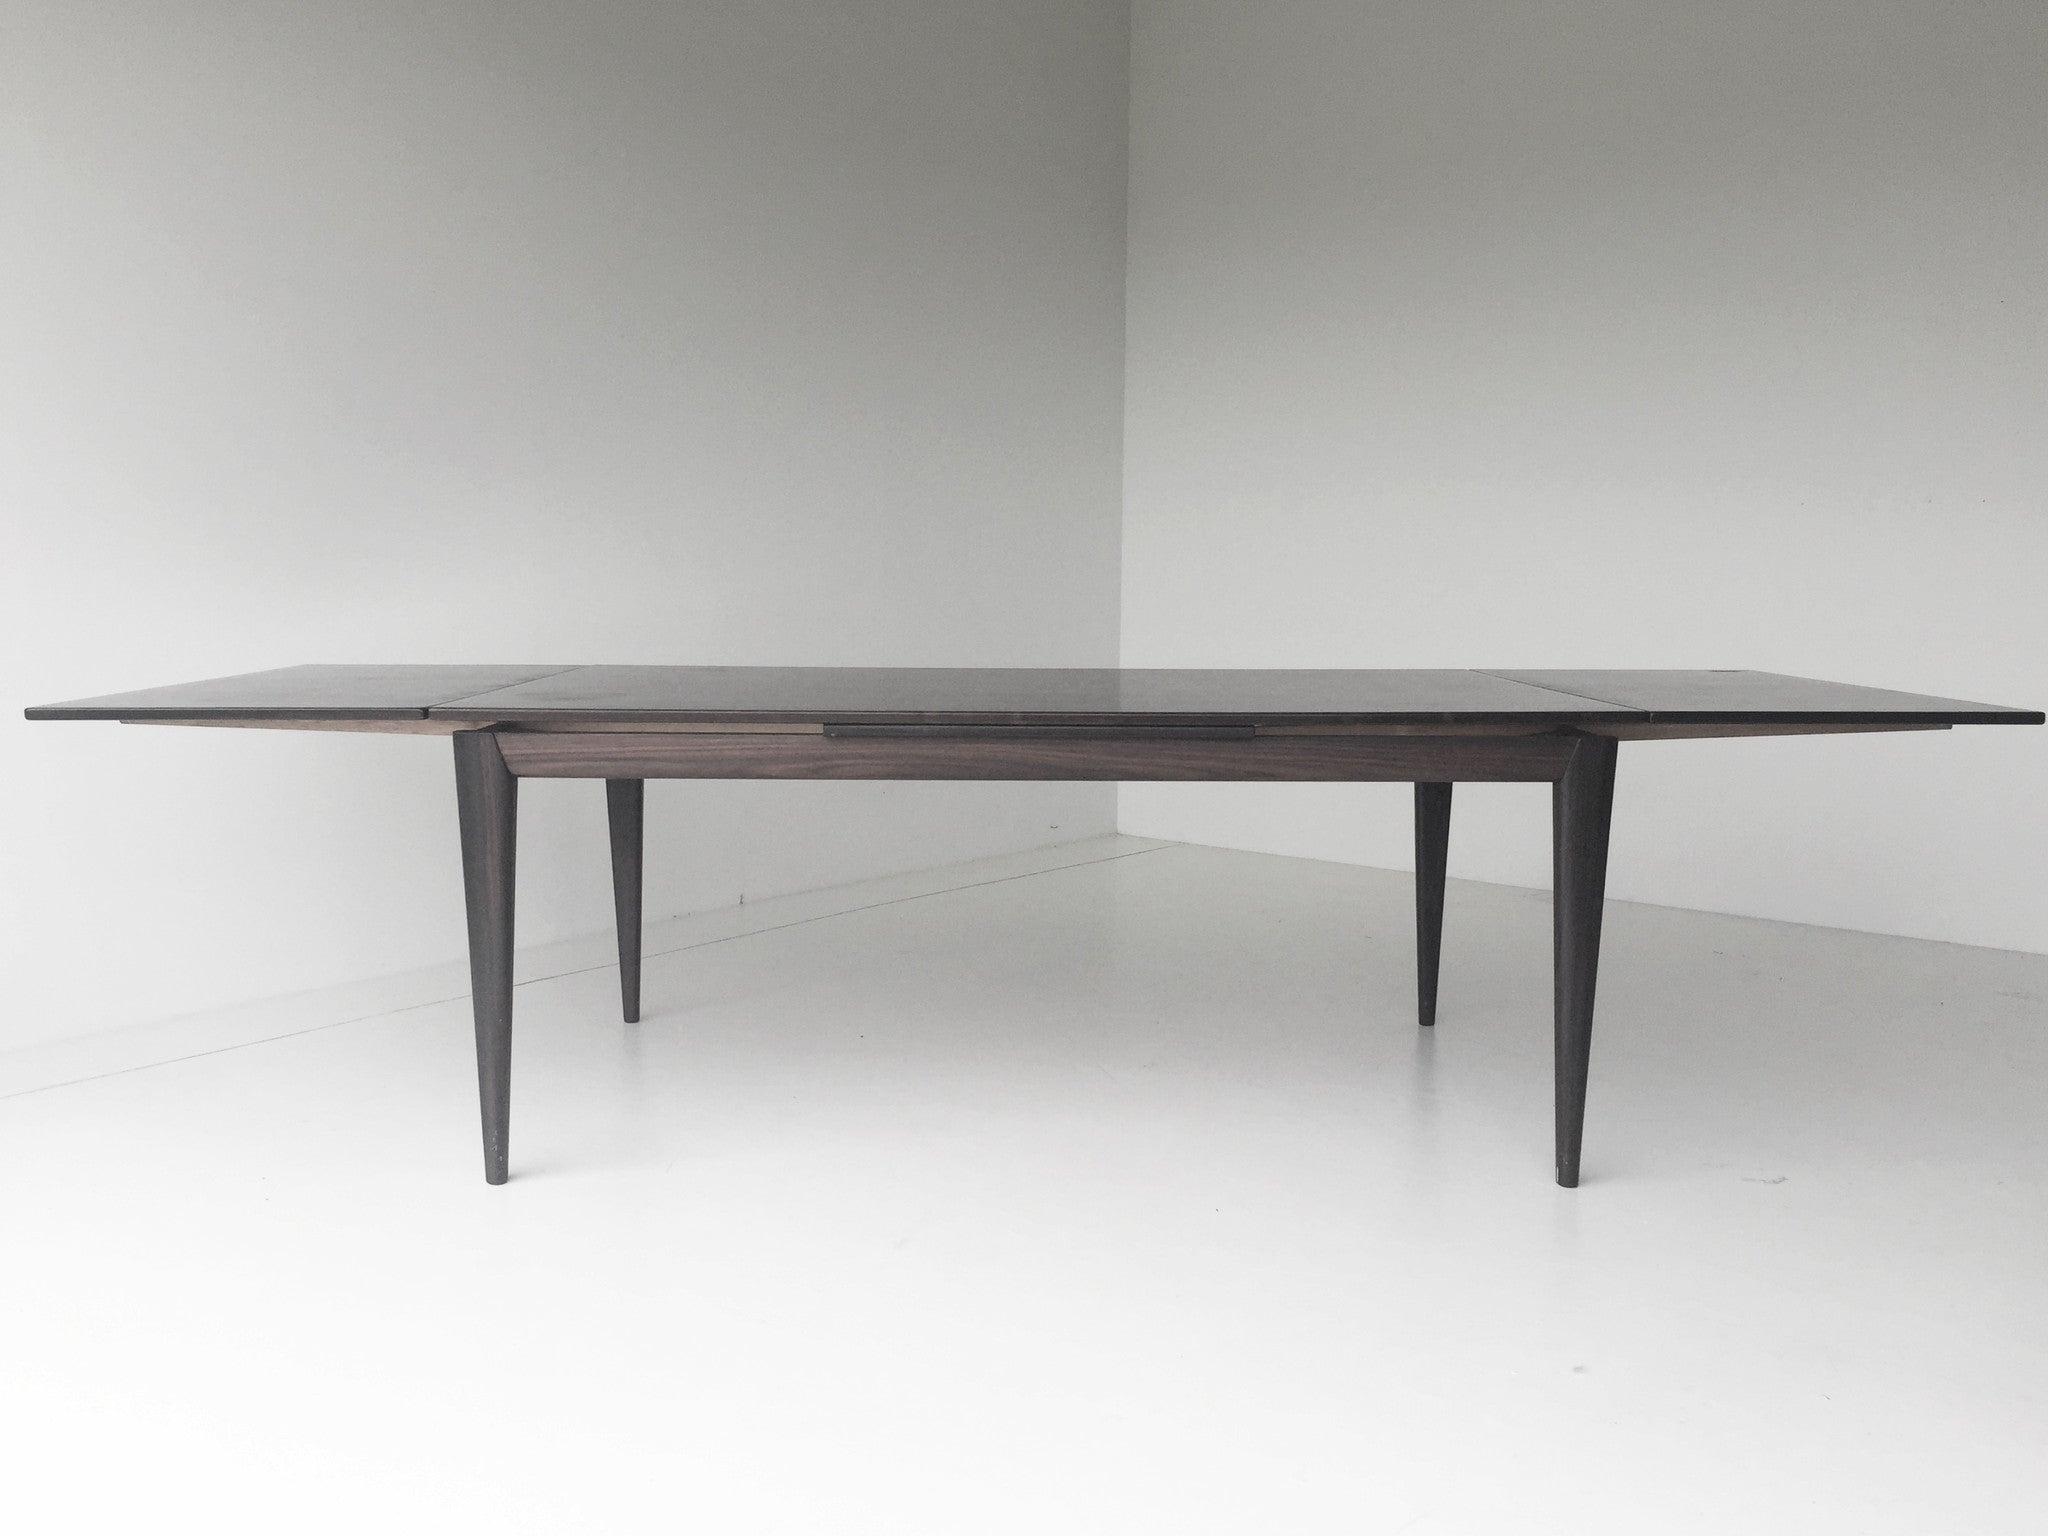 J L Moller Solid Rosewood Dining Table - 06101601